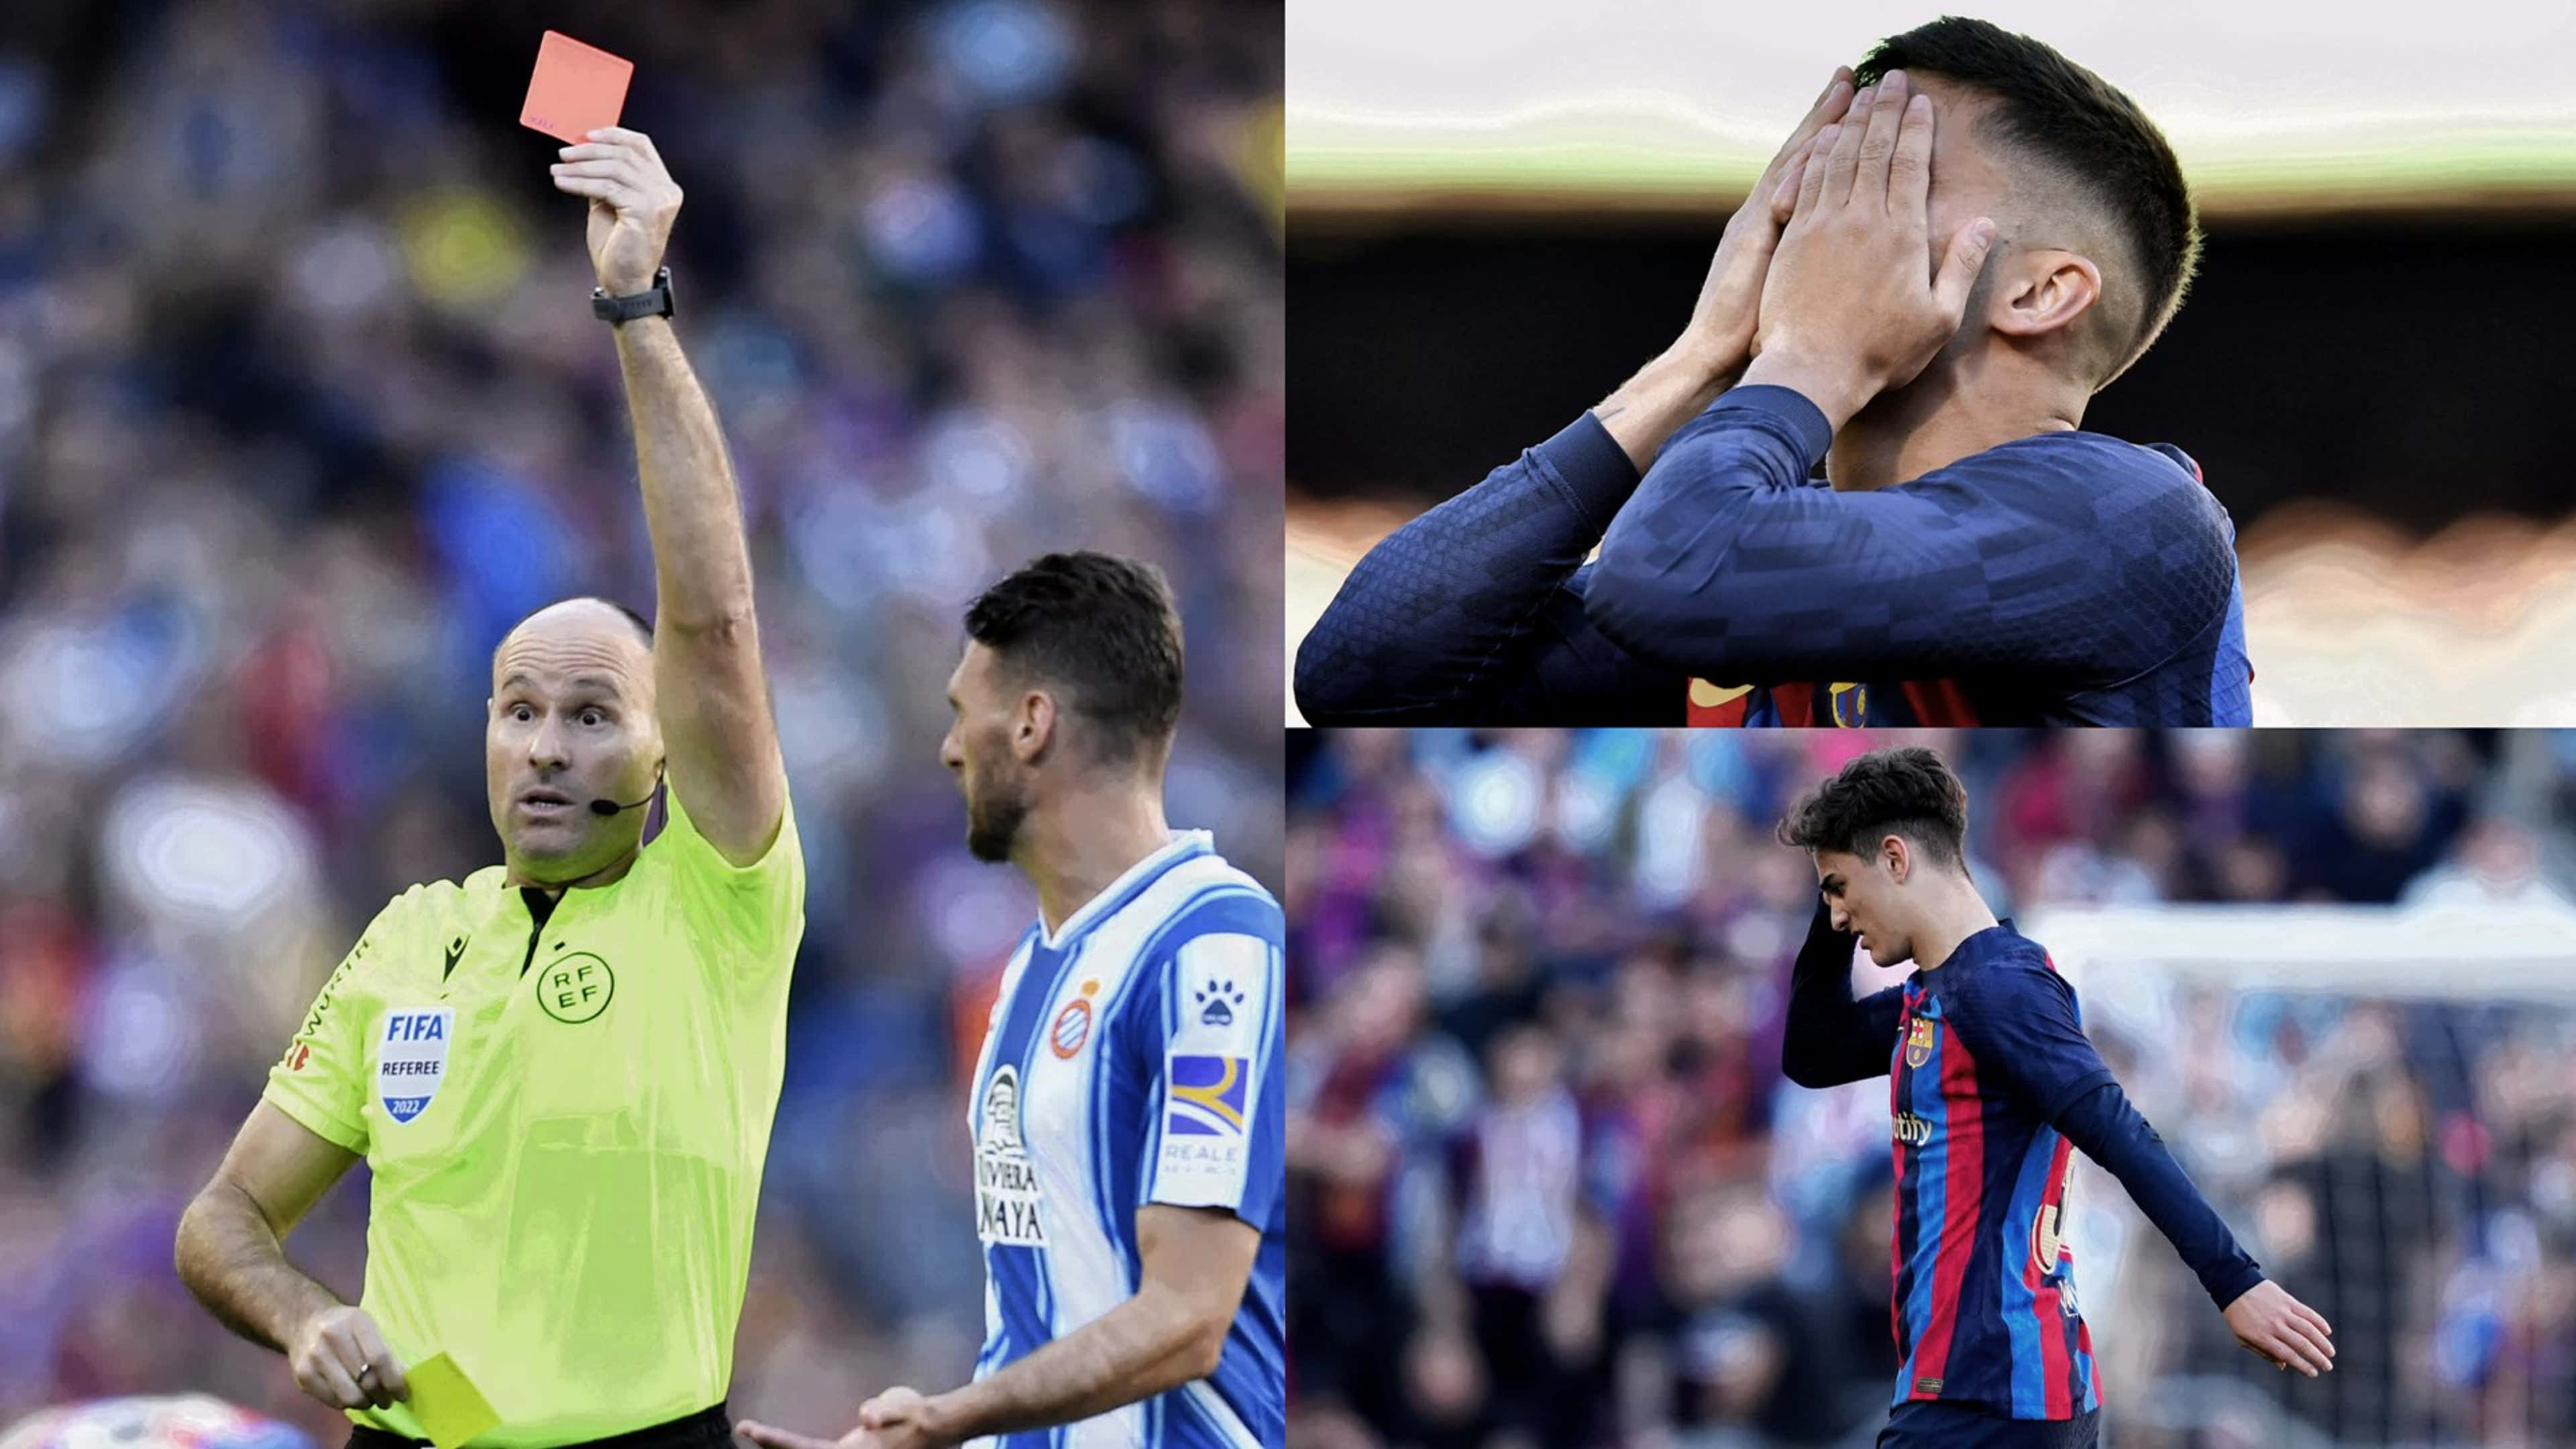 Someone should've tried it with Lahoz': Barca fans react as player